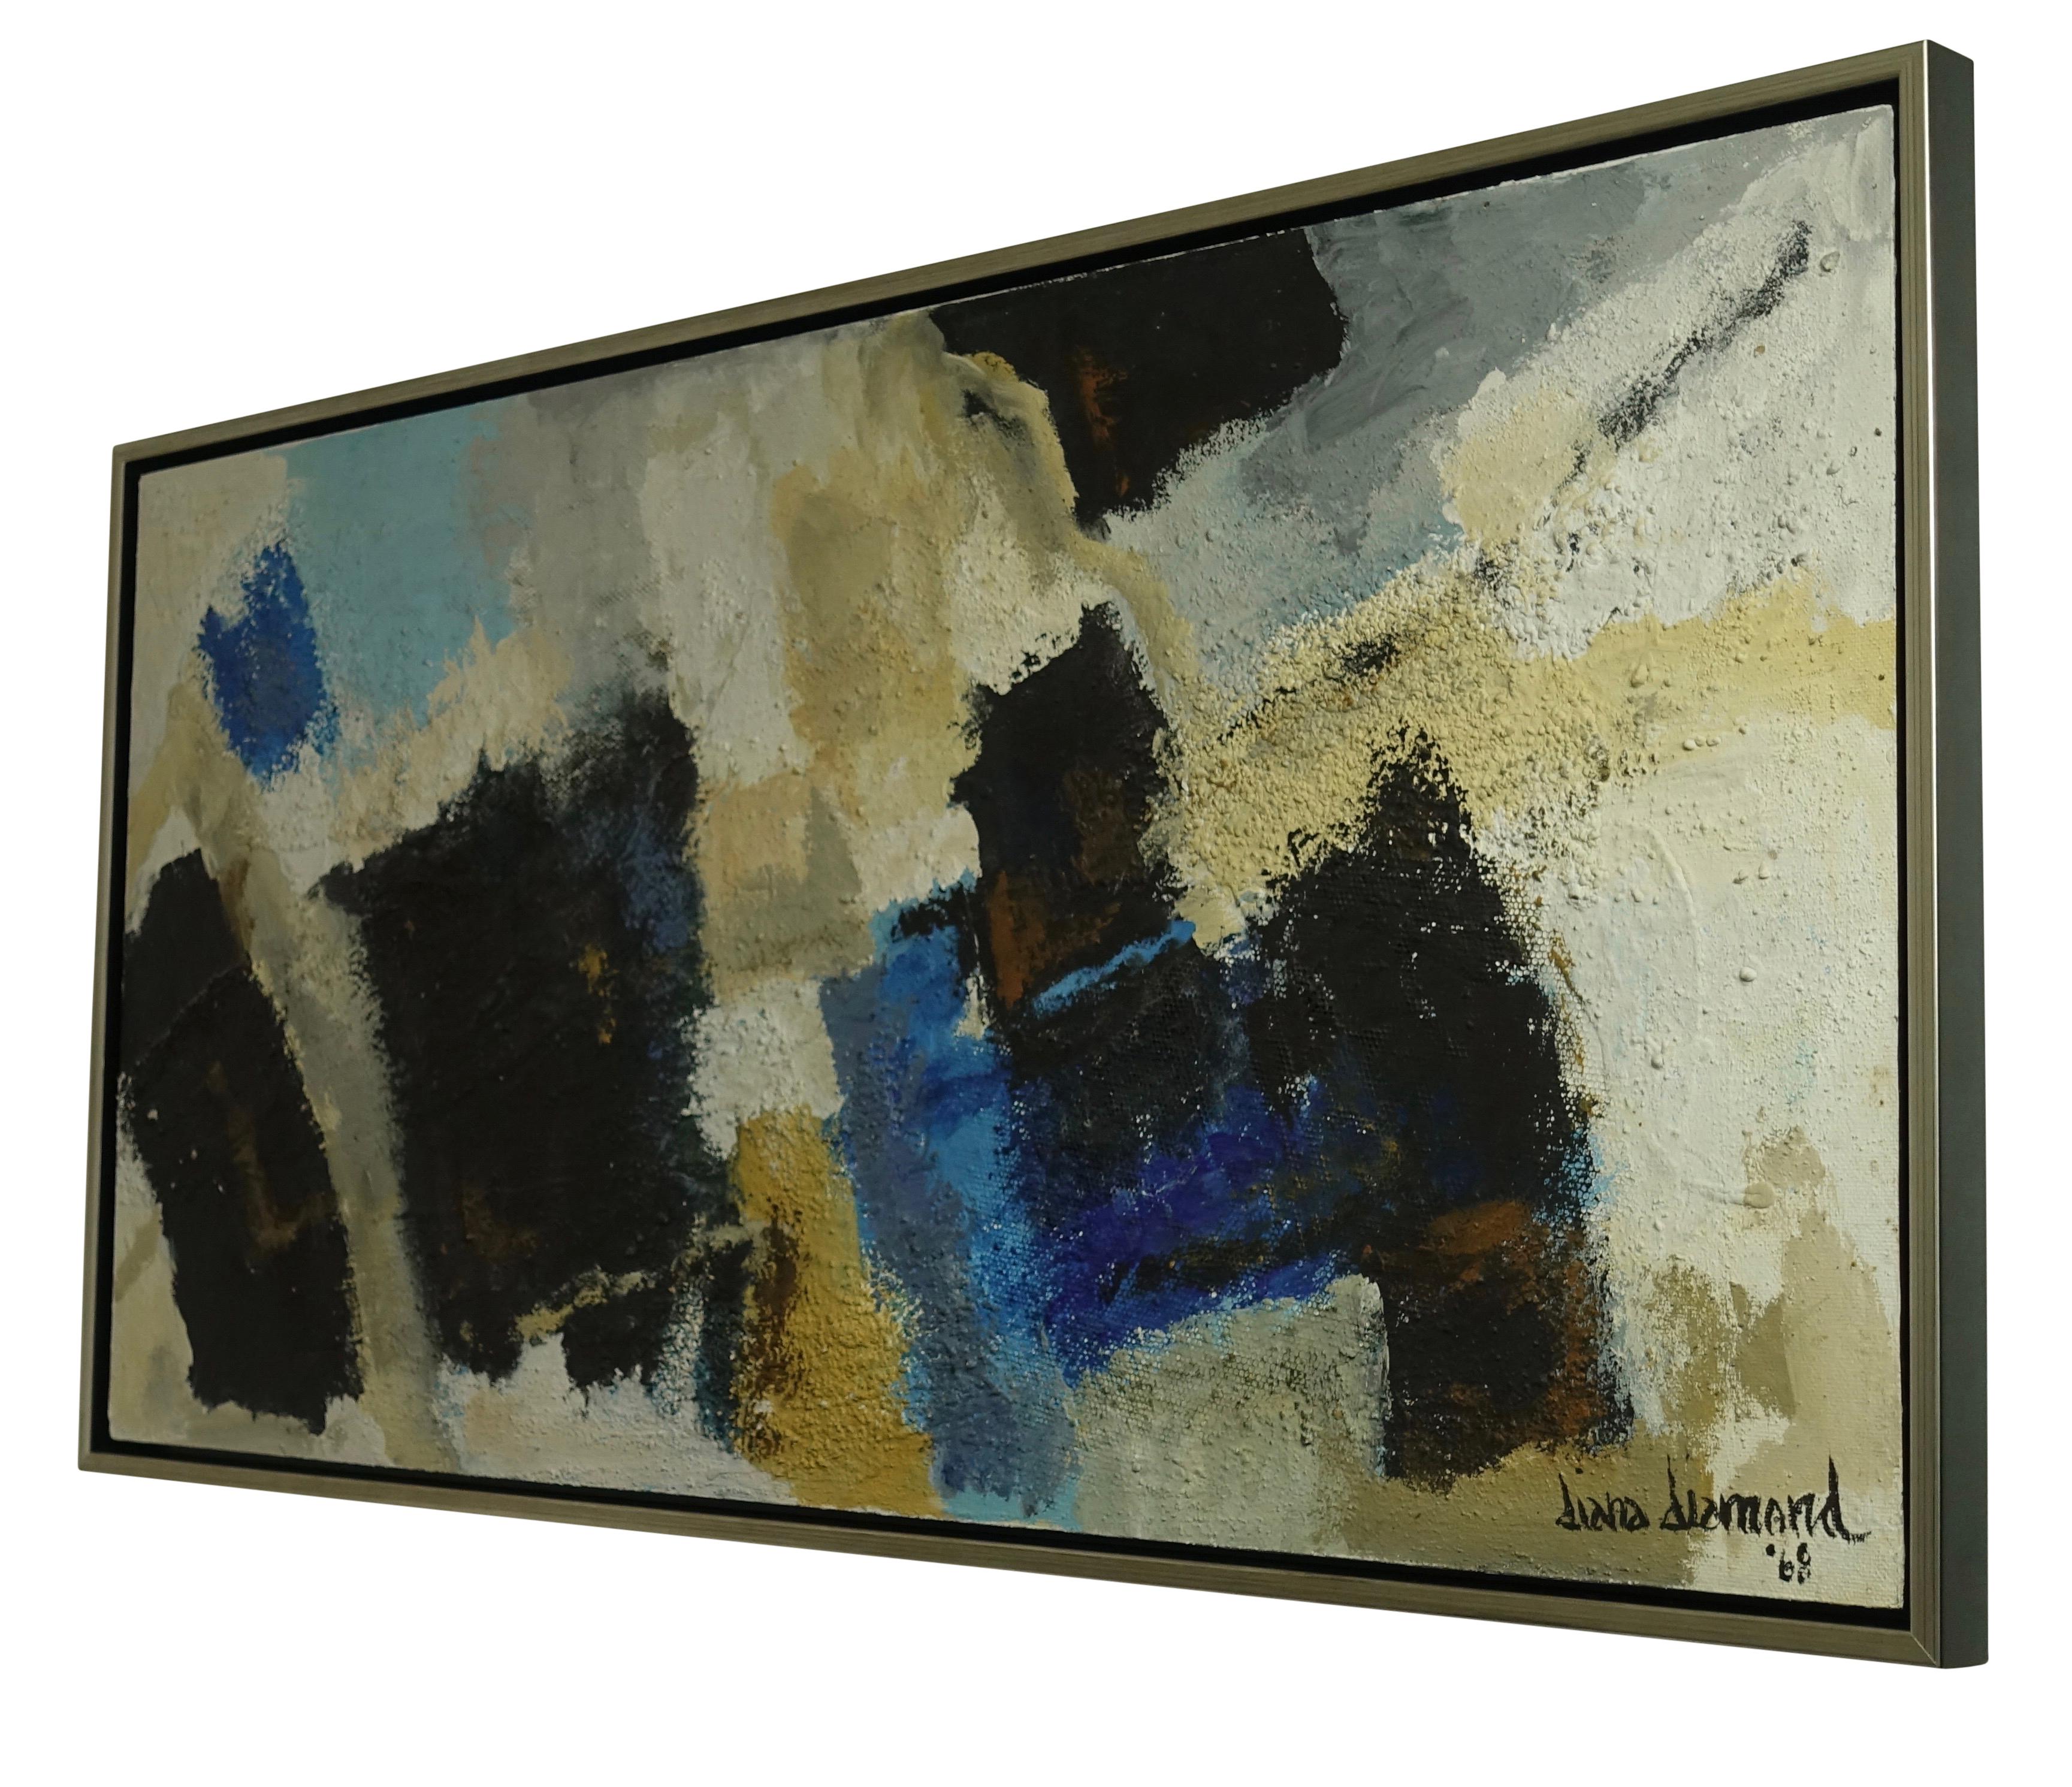 A heavily textured large abstract mixed media painting by American California artist Diana Diamond, signed lower left and dated 1968. Acrylic with crinoline fabric on canvas. Recently framed.
Blues, black, brown, yellow, white and gray.